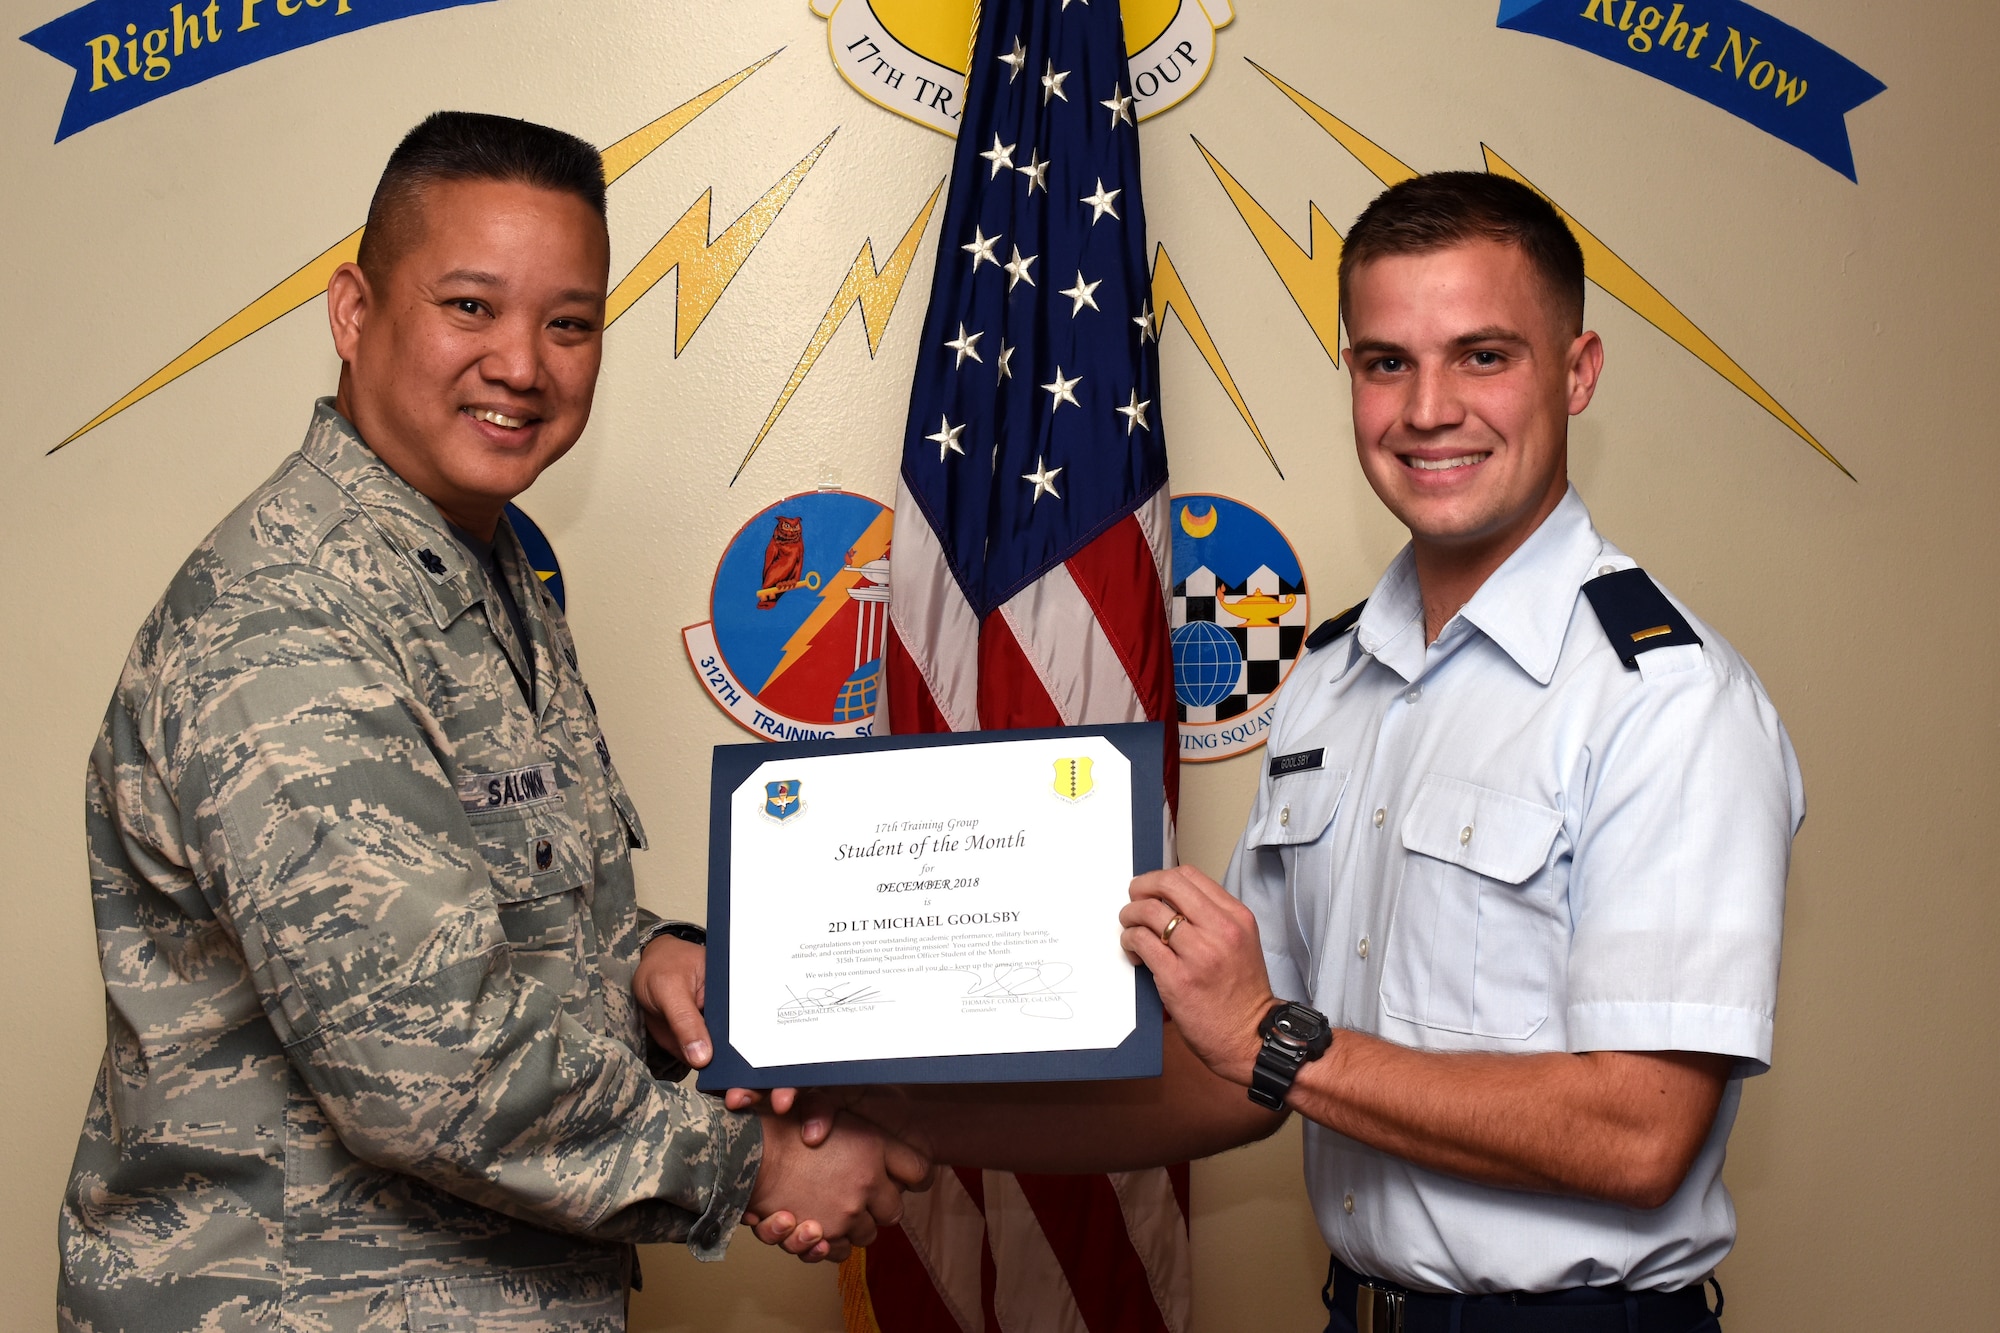 U.S. Air Force Col. Abraham Salomon, 17th Training Group deputy commander, presents the 315th Training Squadron Officer Student of the Month award to 2nd Lt. Michael Goolsby, 315th TRS student at Brandenburg Hall on Goodfellow Air Force Base, Texas, Jan. 4, 2019. The 315th TRS’s vision is to develop combat-ready intelligence, surveillance and reconnaissance professionals and promote an innovative squadron culture and identity unmatched across the U.S. Air Force. (U.S. Air Force photo by Airman 1st Class Zachary Chapman/Released)